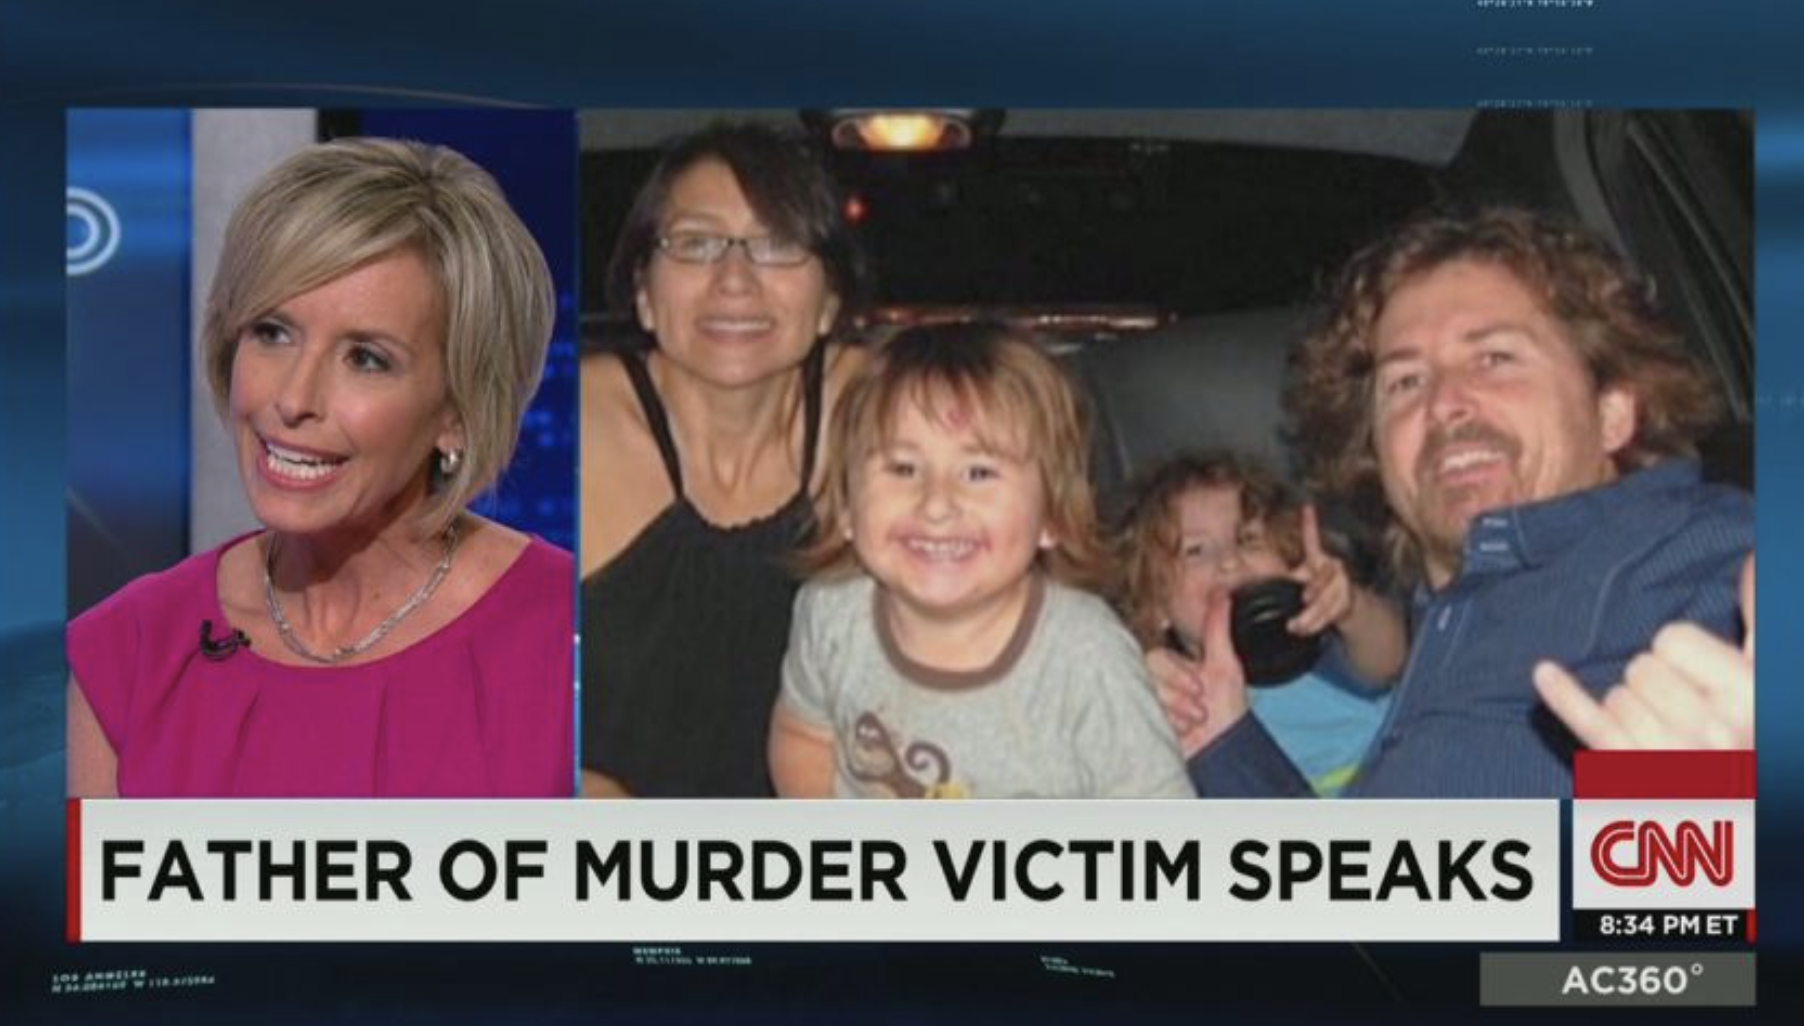 Chasing a killer: The McStay family murders